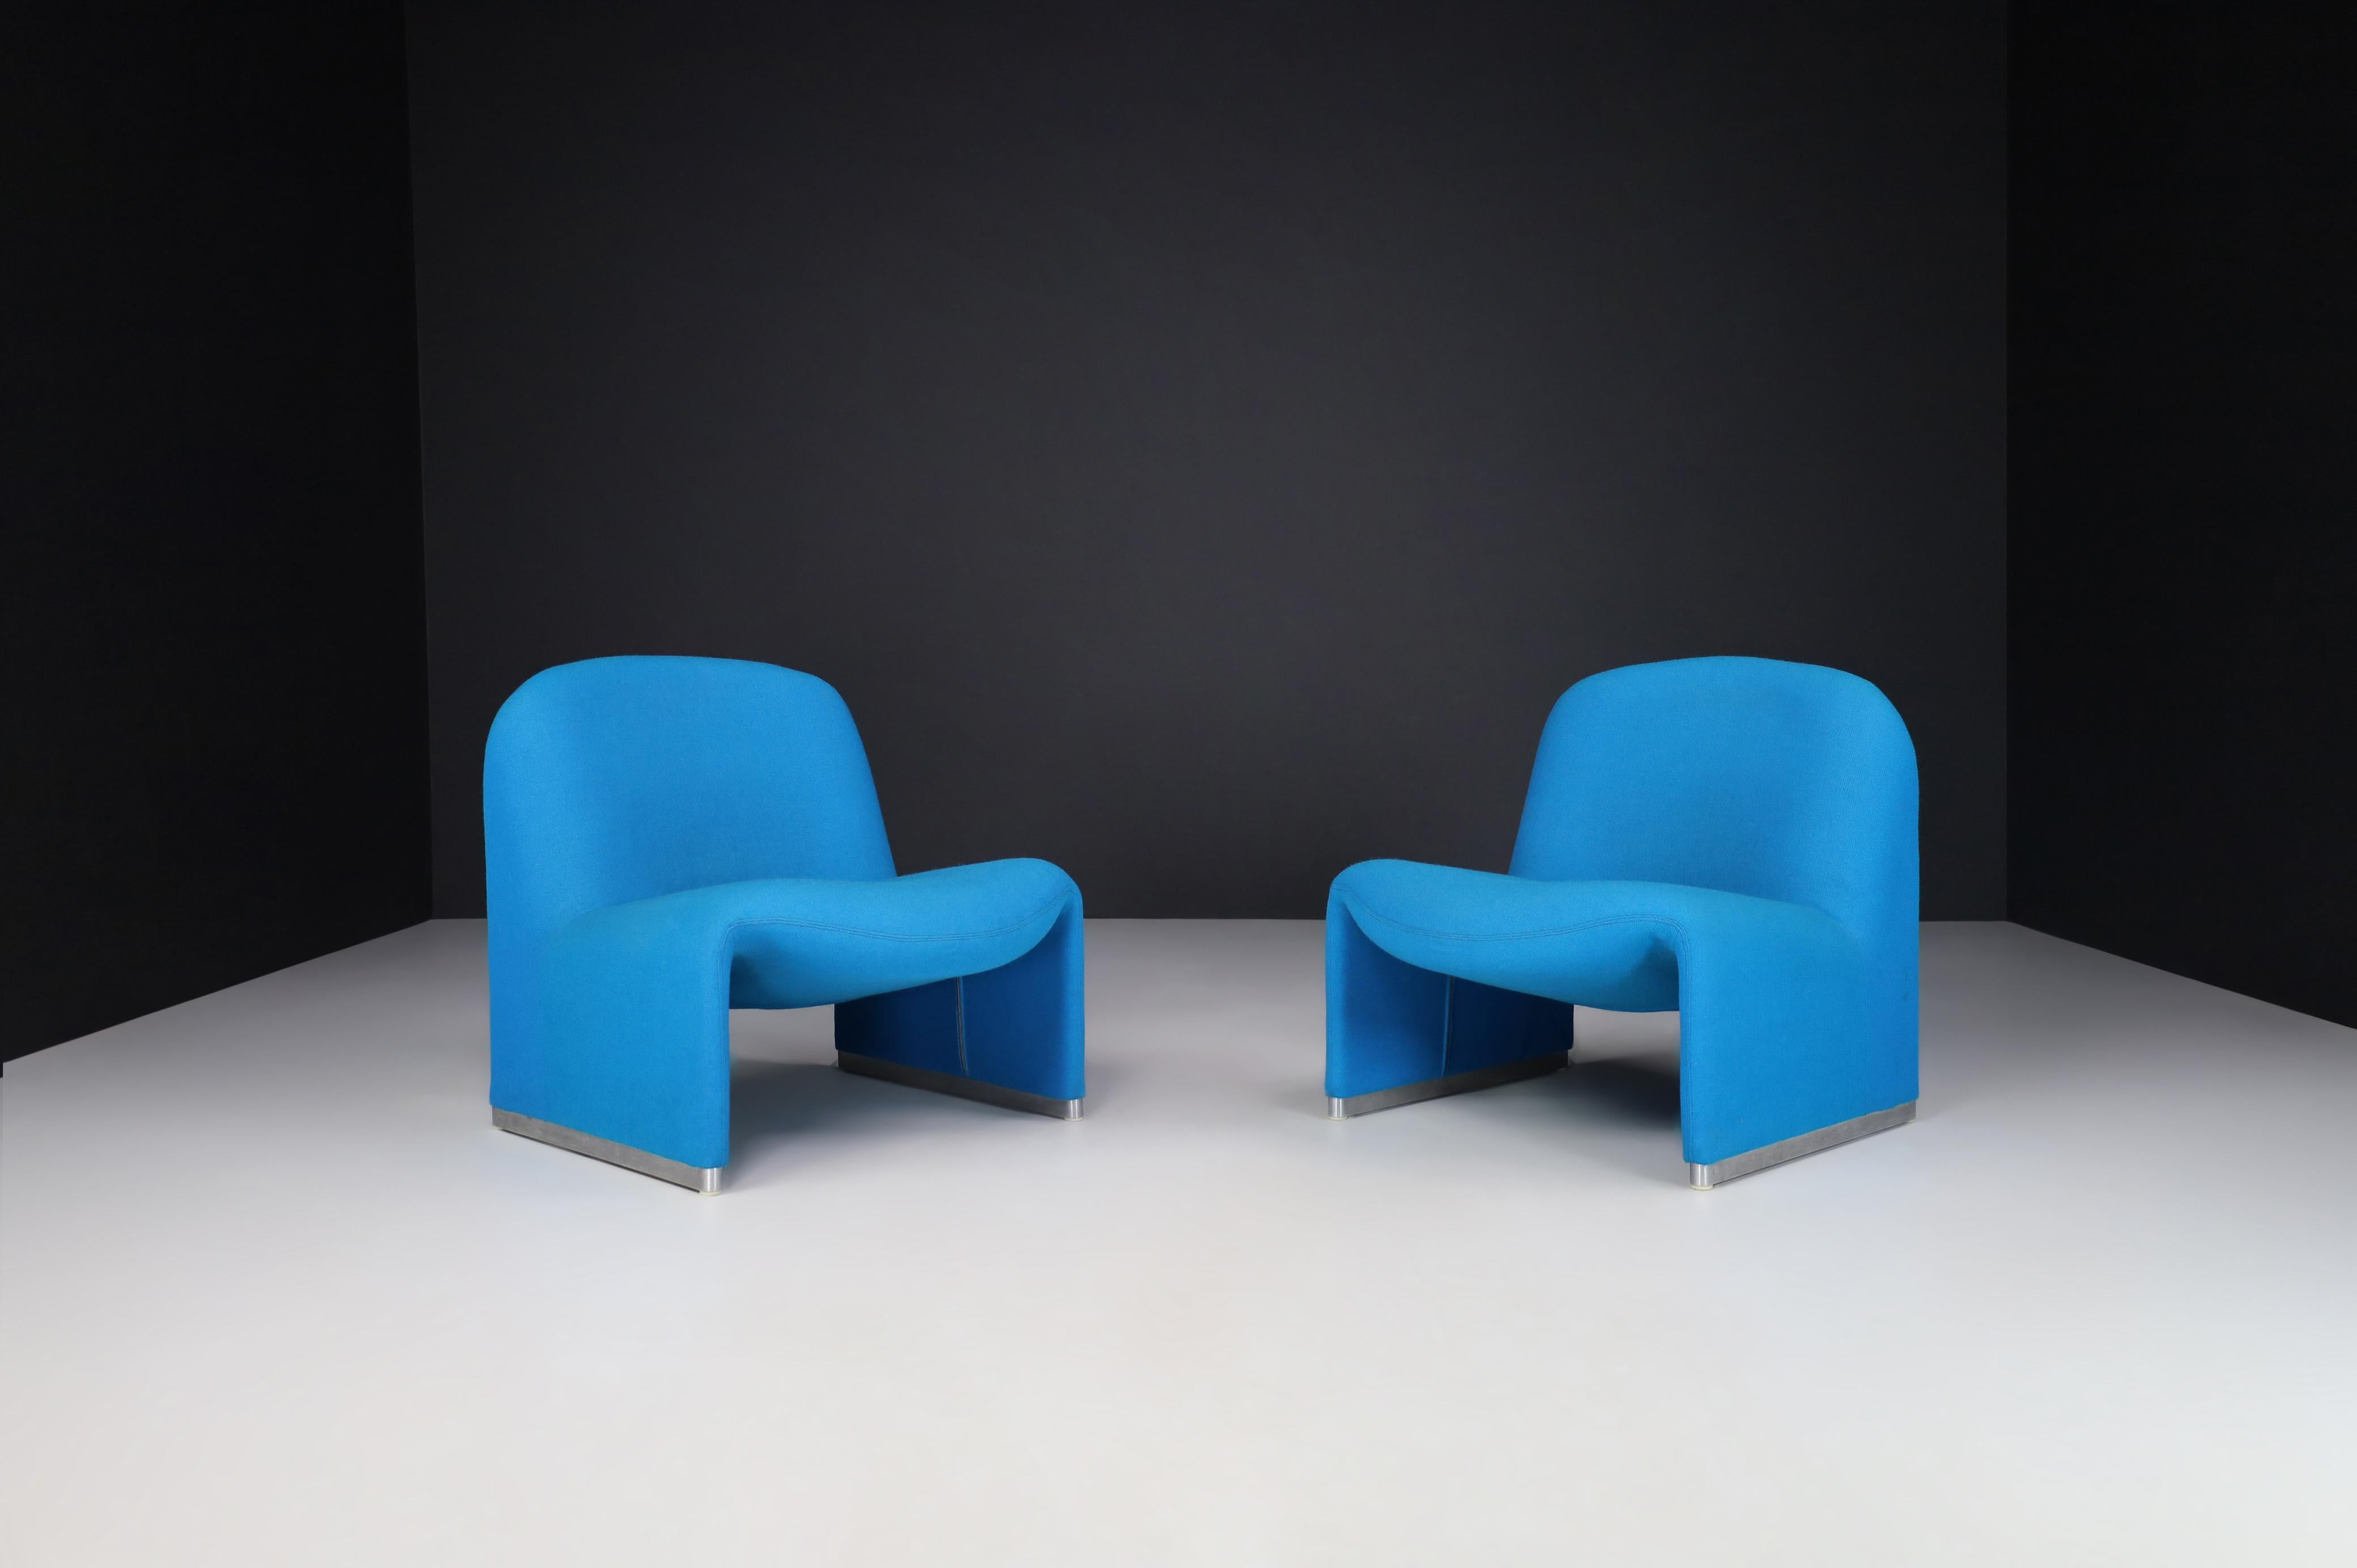 Giancarlo Piretti Alky Chairs in Original Blue Upholstery, Italy 1969

Giancarlo Piretti designed these Alky chairs for Castelli in 1969. Sculptural, fantastic modern design in the original blue fabric in excellent condition. These chairs look